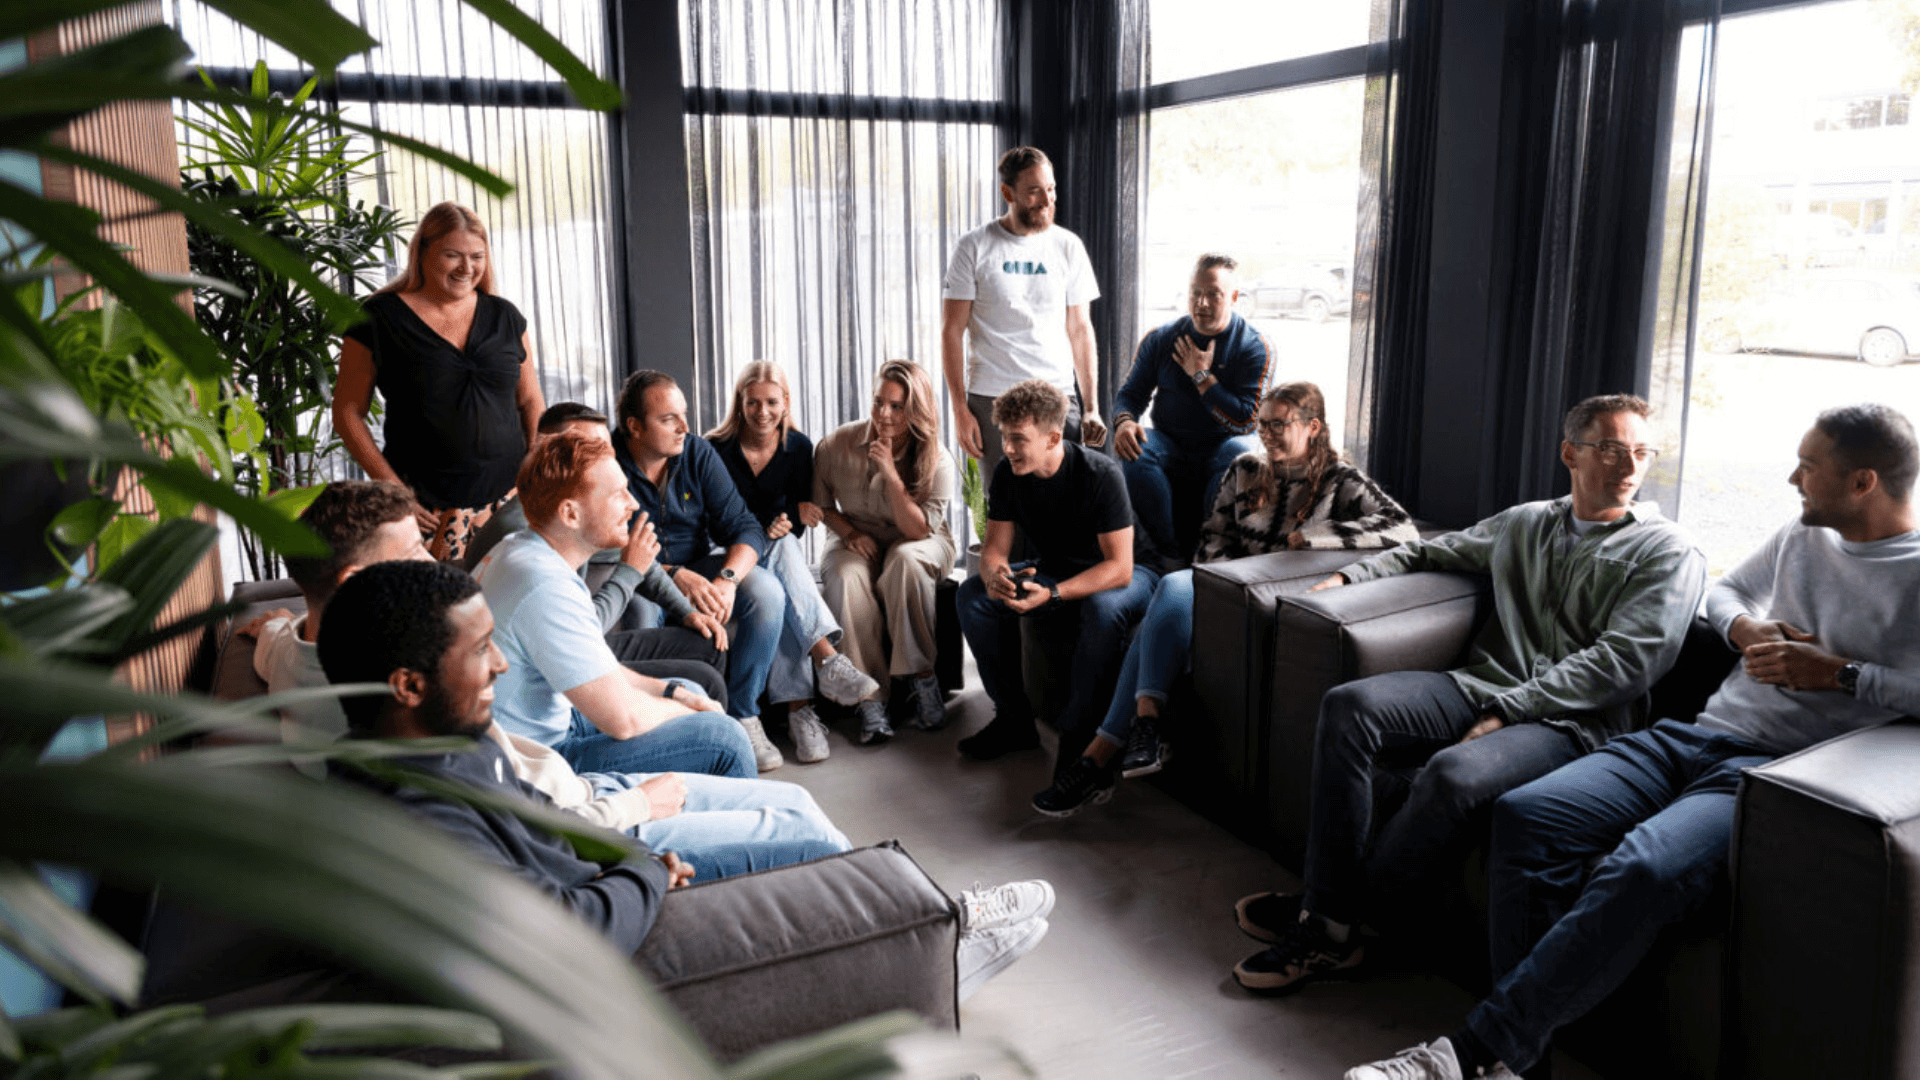 Over ons online marketing agency